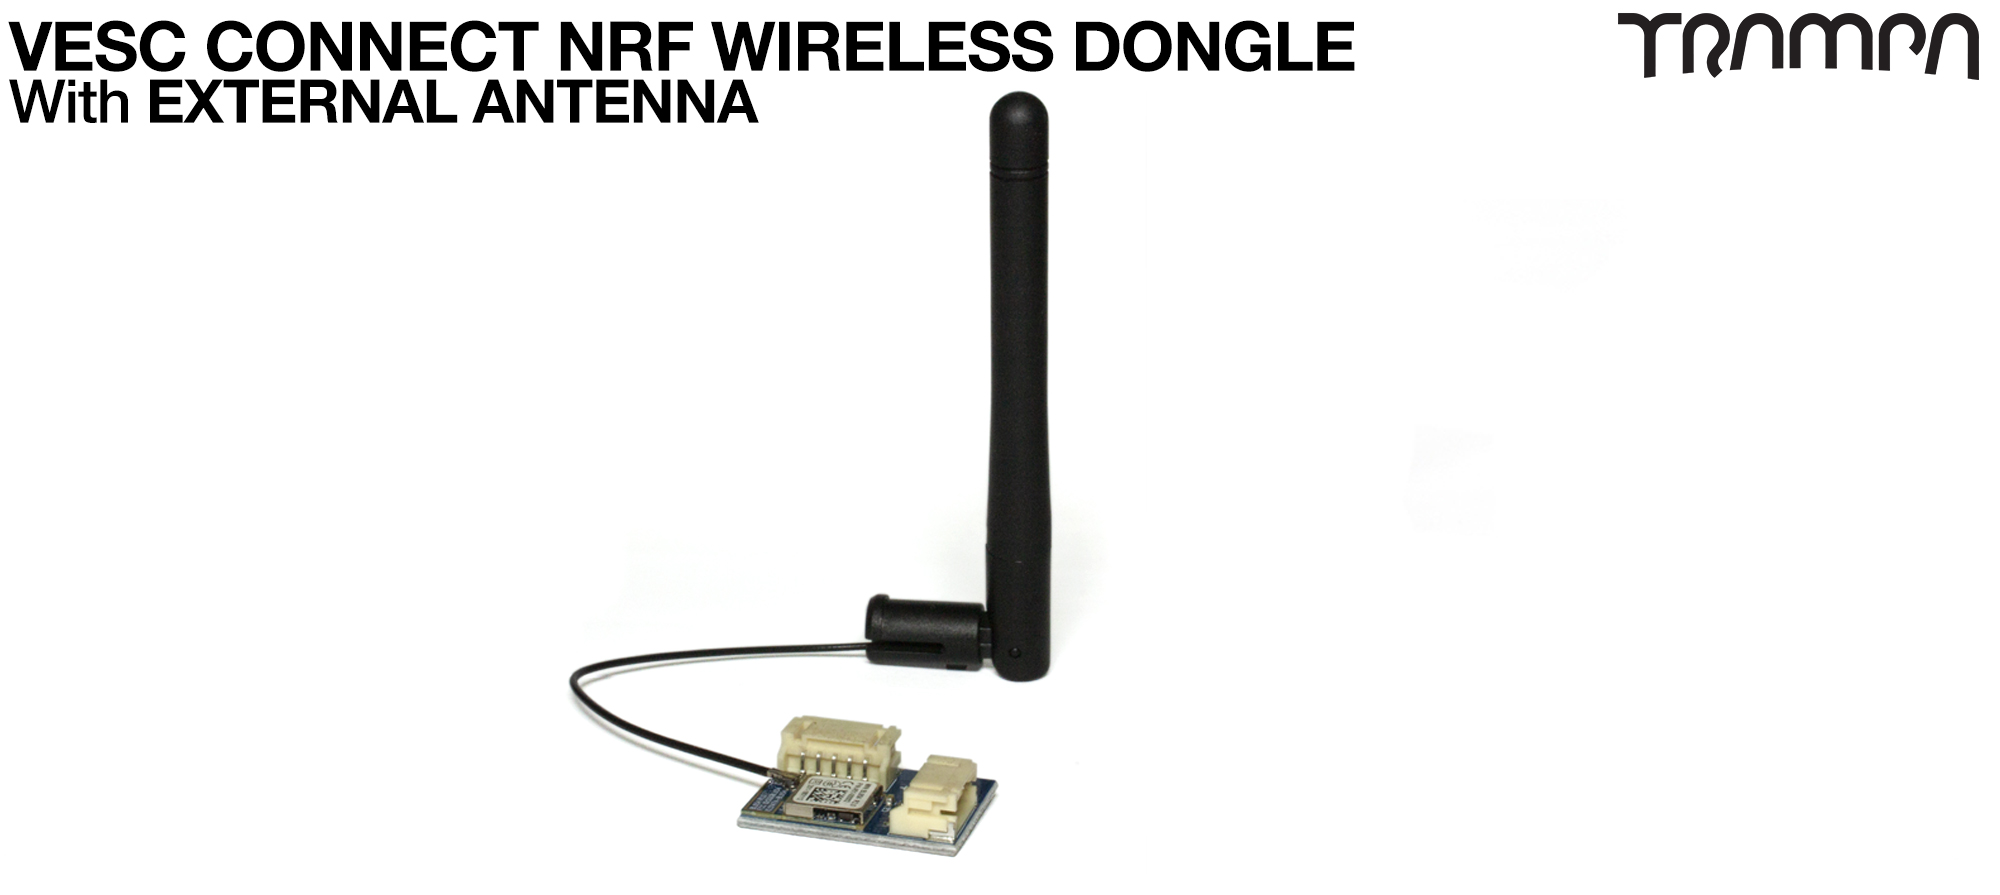 4x VESC Connect Dongle & EXTERNAL ANTENNA  (+£120) - OUT OF STOCK